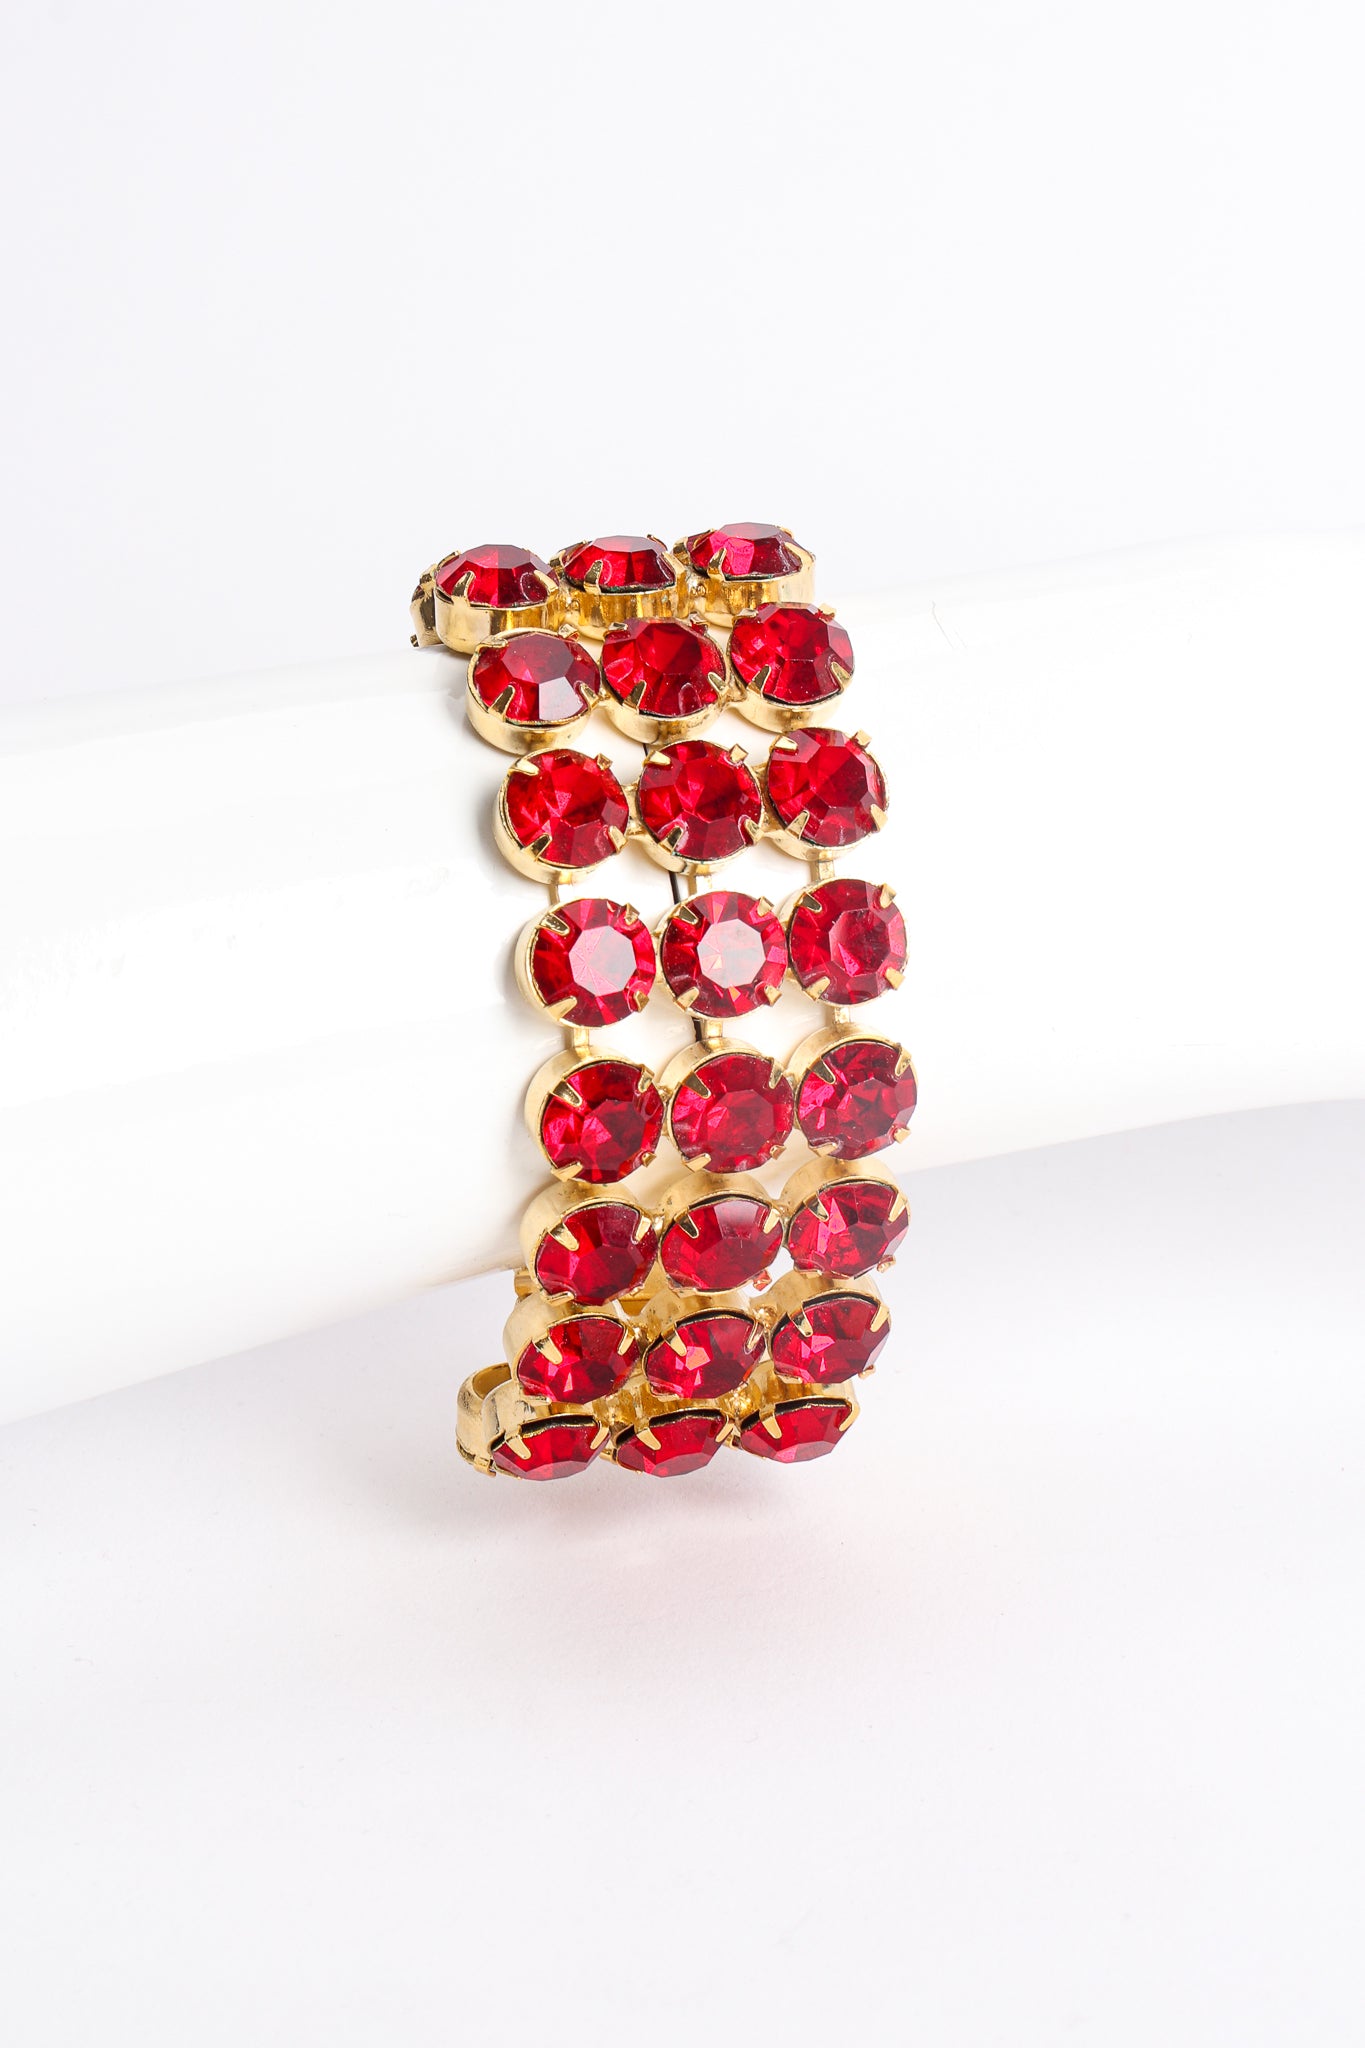 Vintage Dominique Chunky Ruby Rhinestone Bracelet on mannequin at Recess Los Angeles